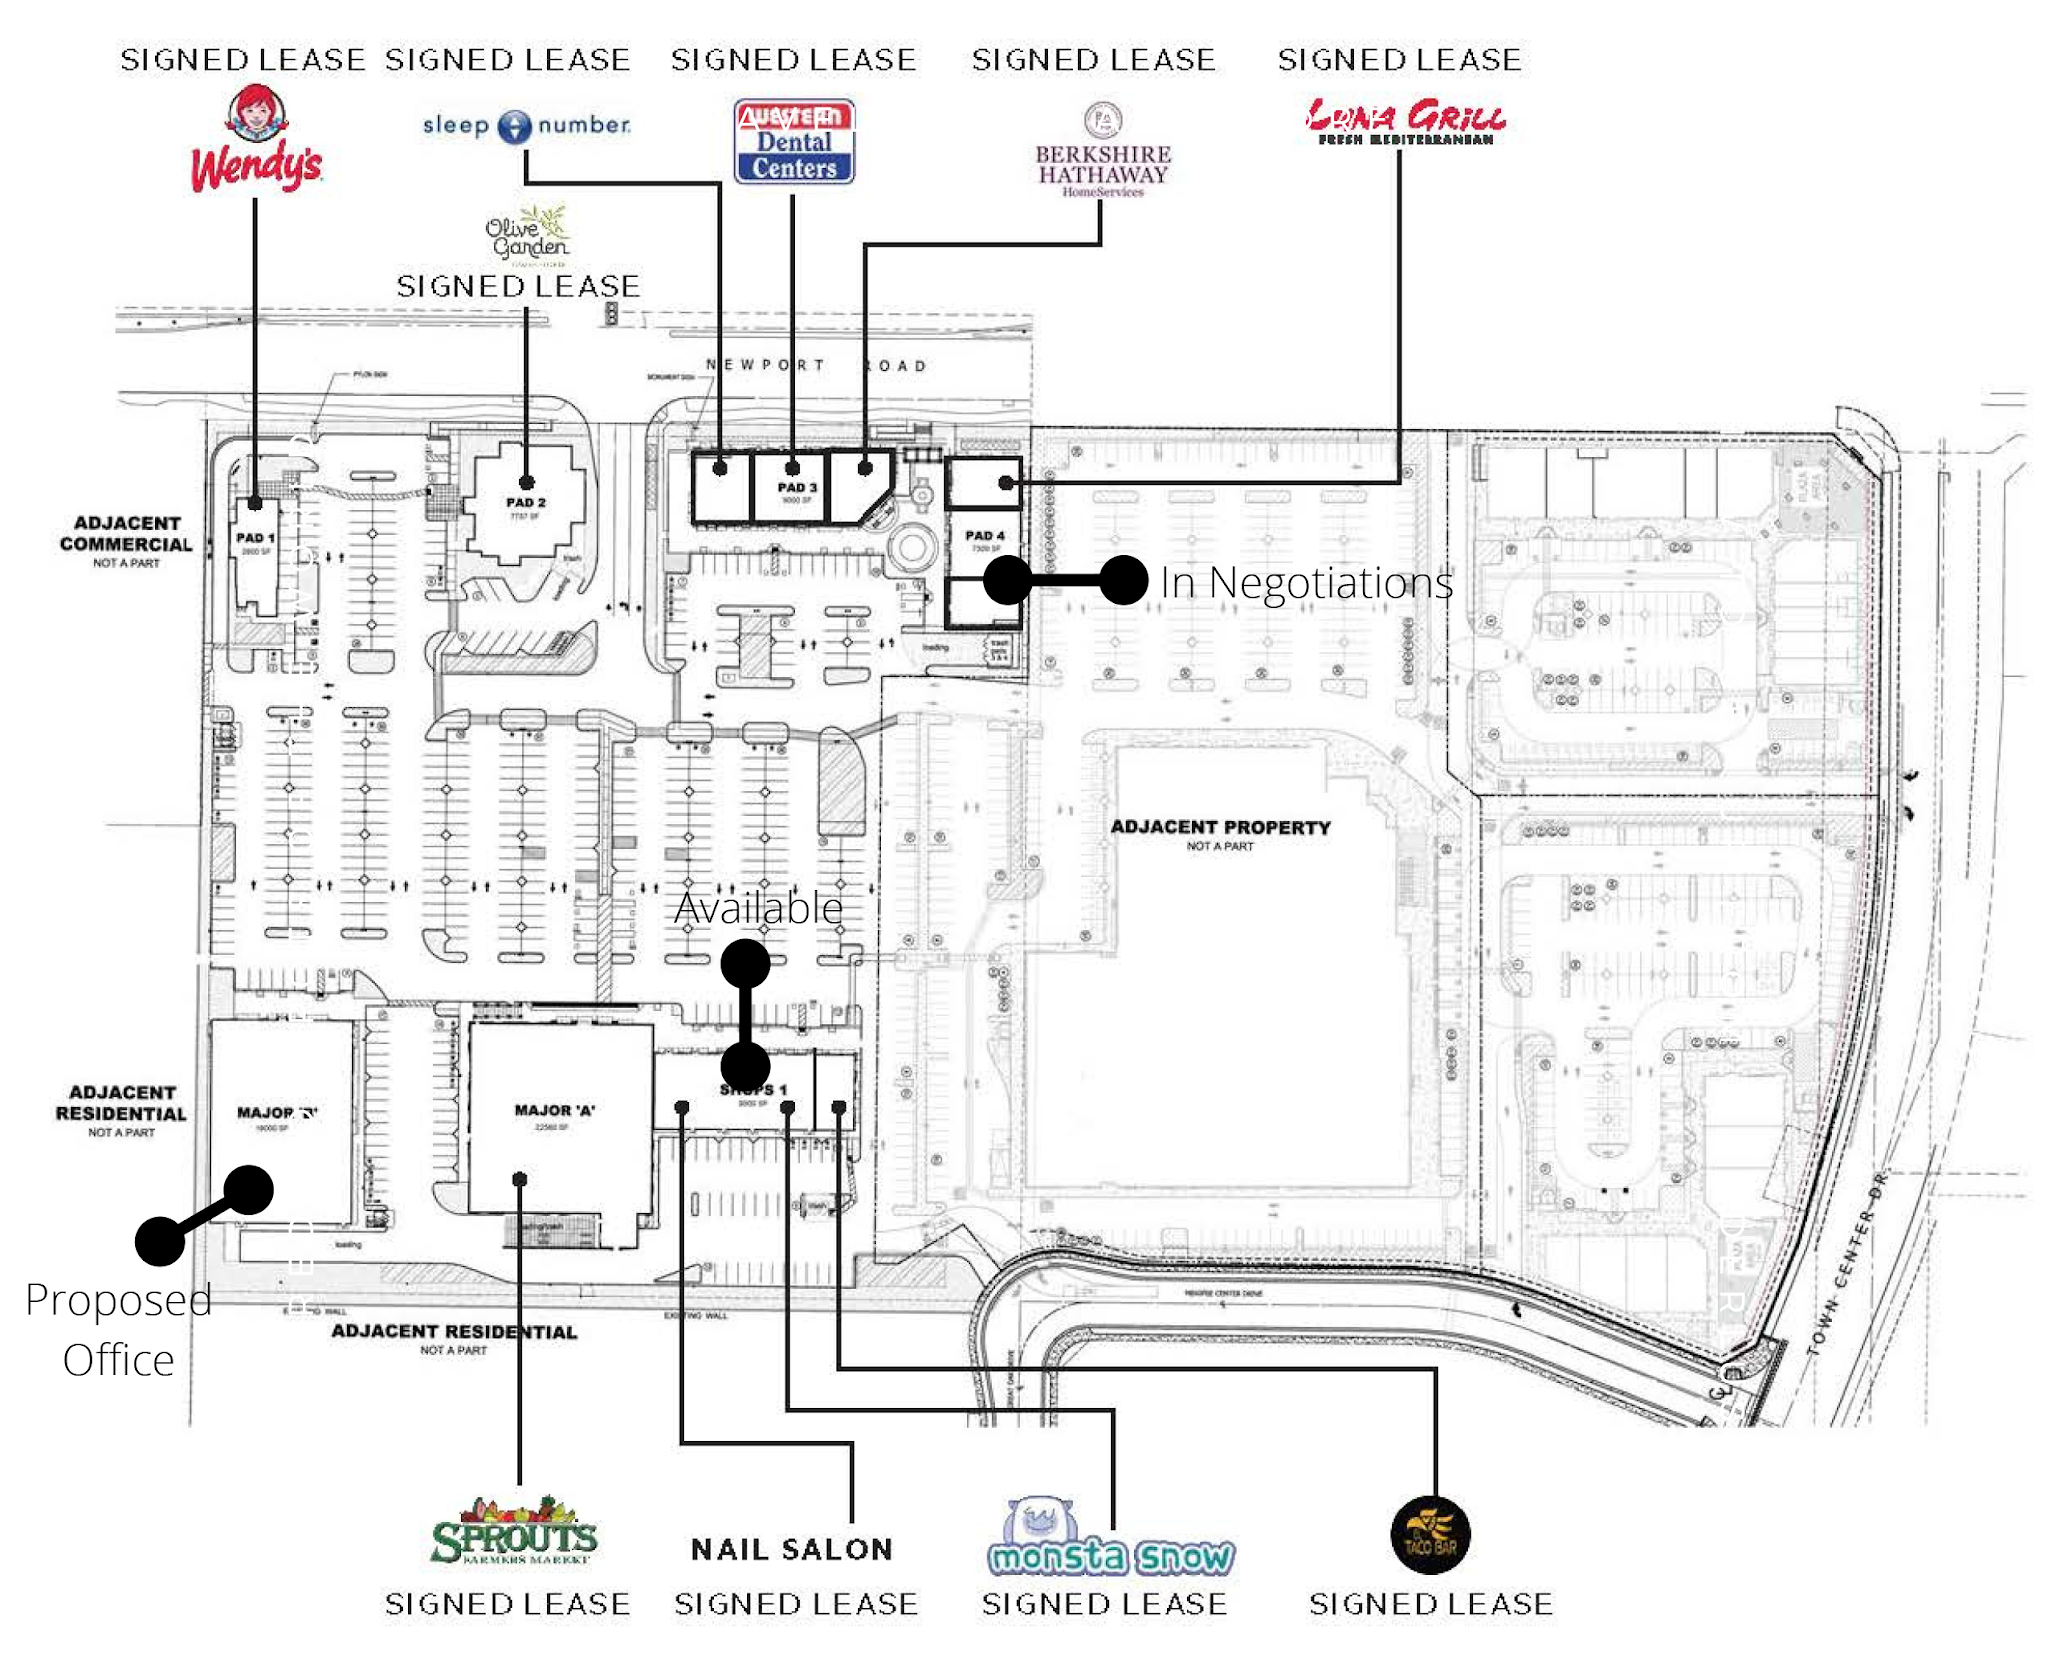 City Releases Updated Map Of Future Center Pointe Tenants Menifee 24 7